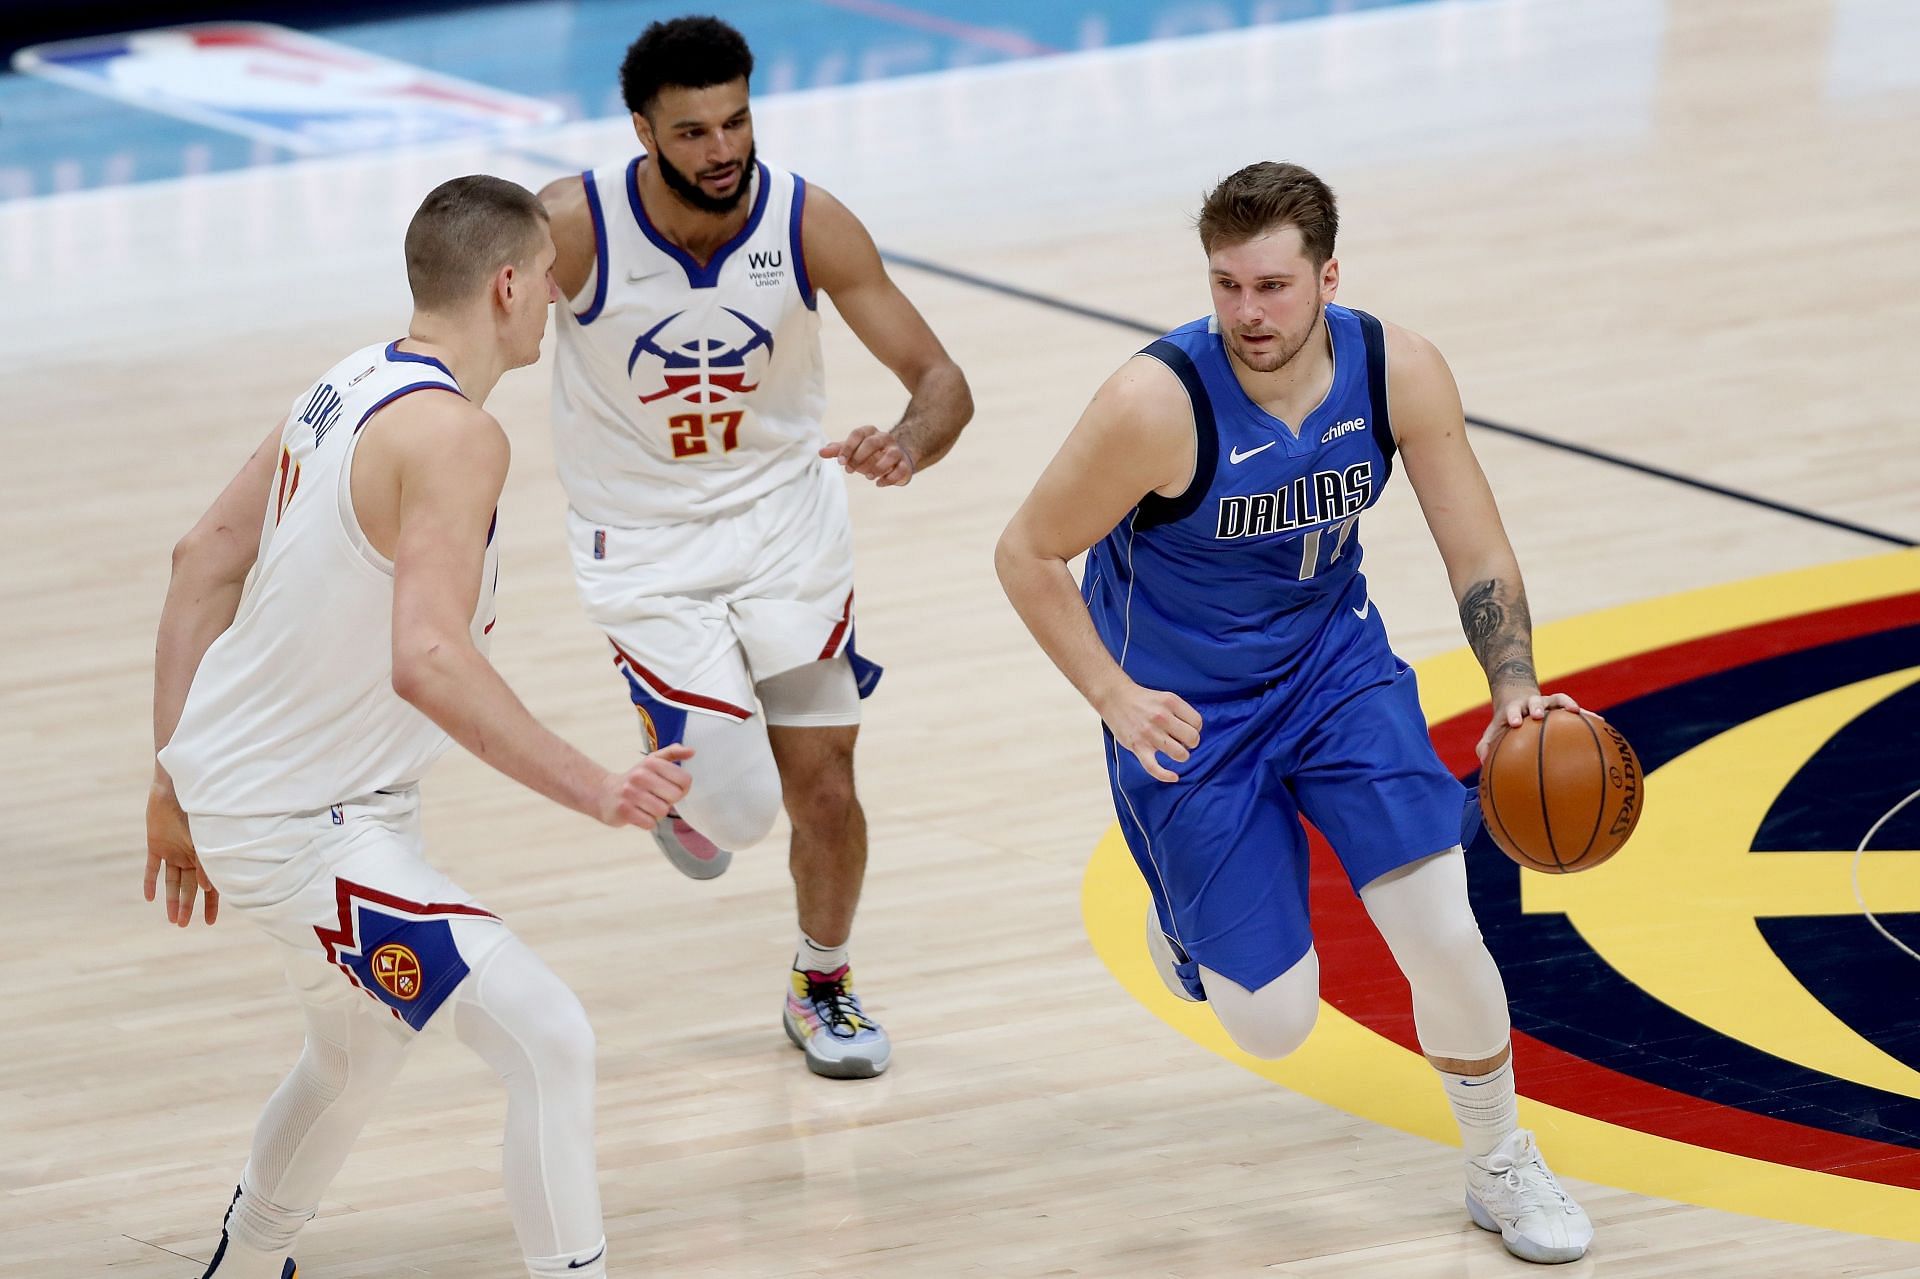 Luka Doncic (R) of the Dallas Mavericks guarded by Jamal Murray and Nikola Jokic of the Denver Nuggets